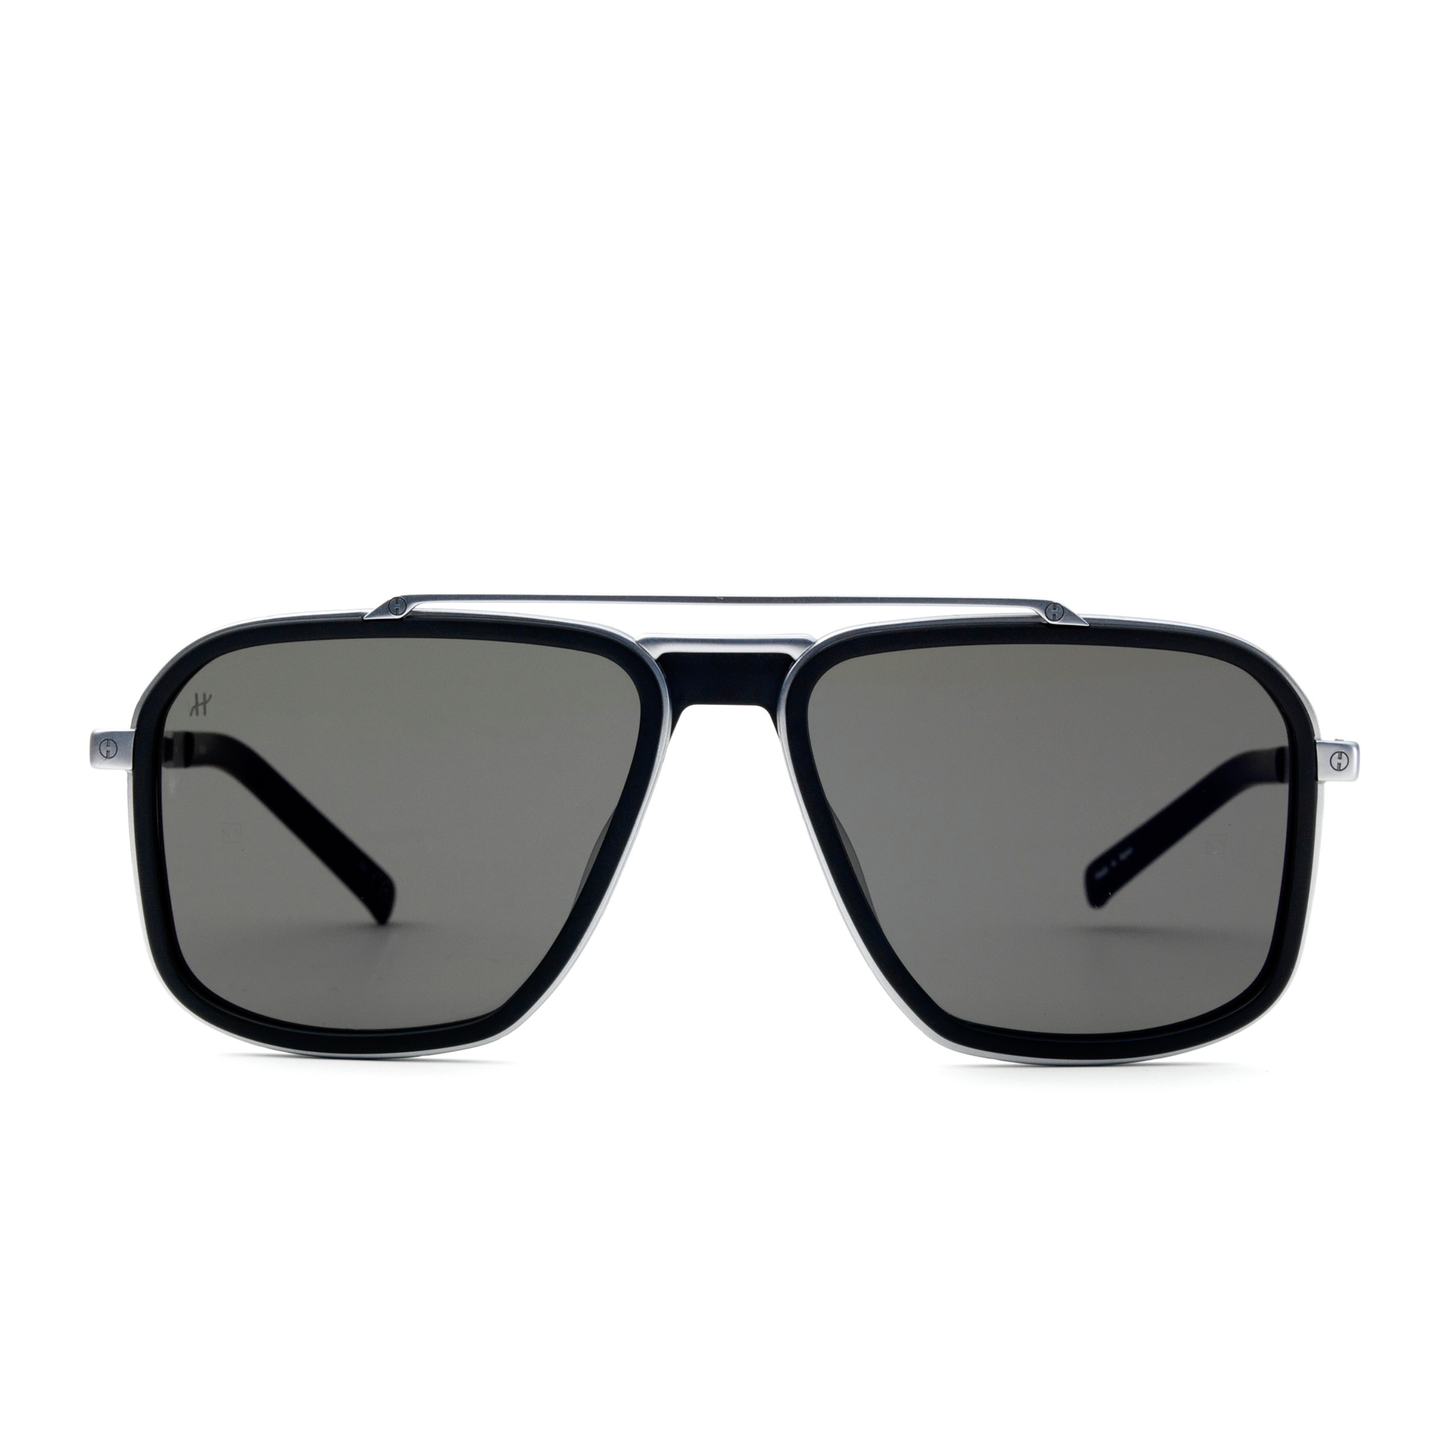 Silver Matte Squared Sunglasses with Red Mirror Lens